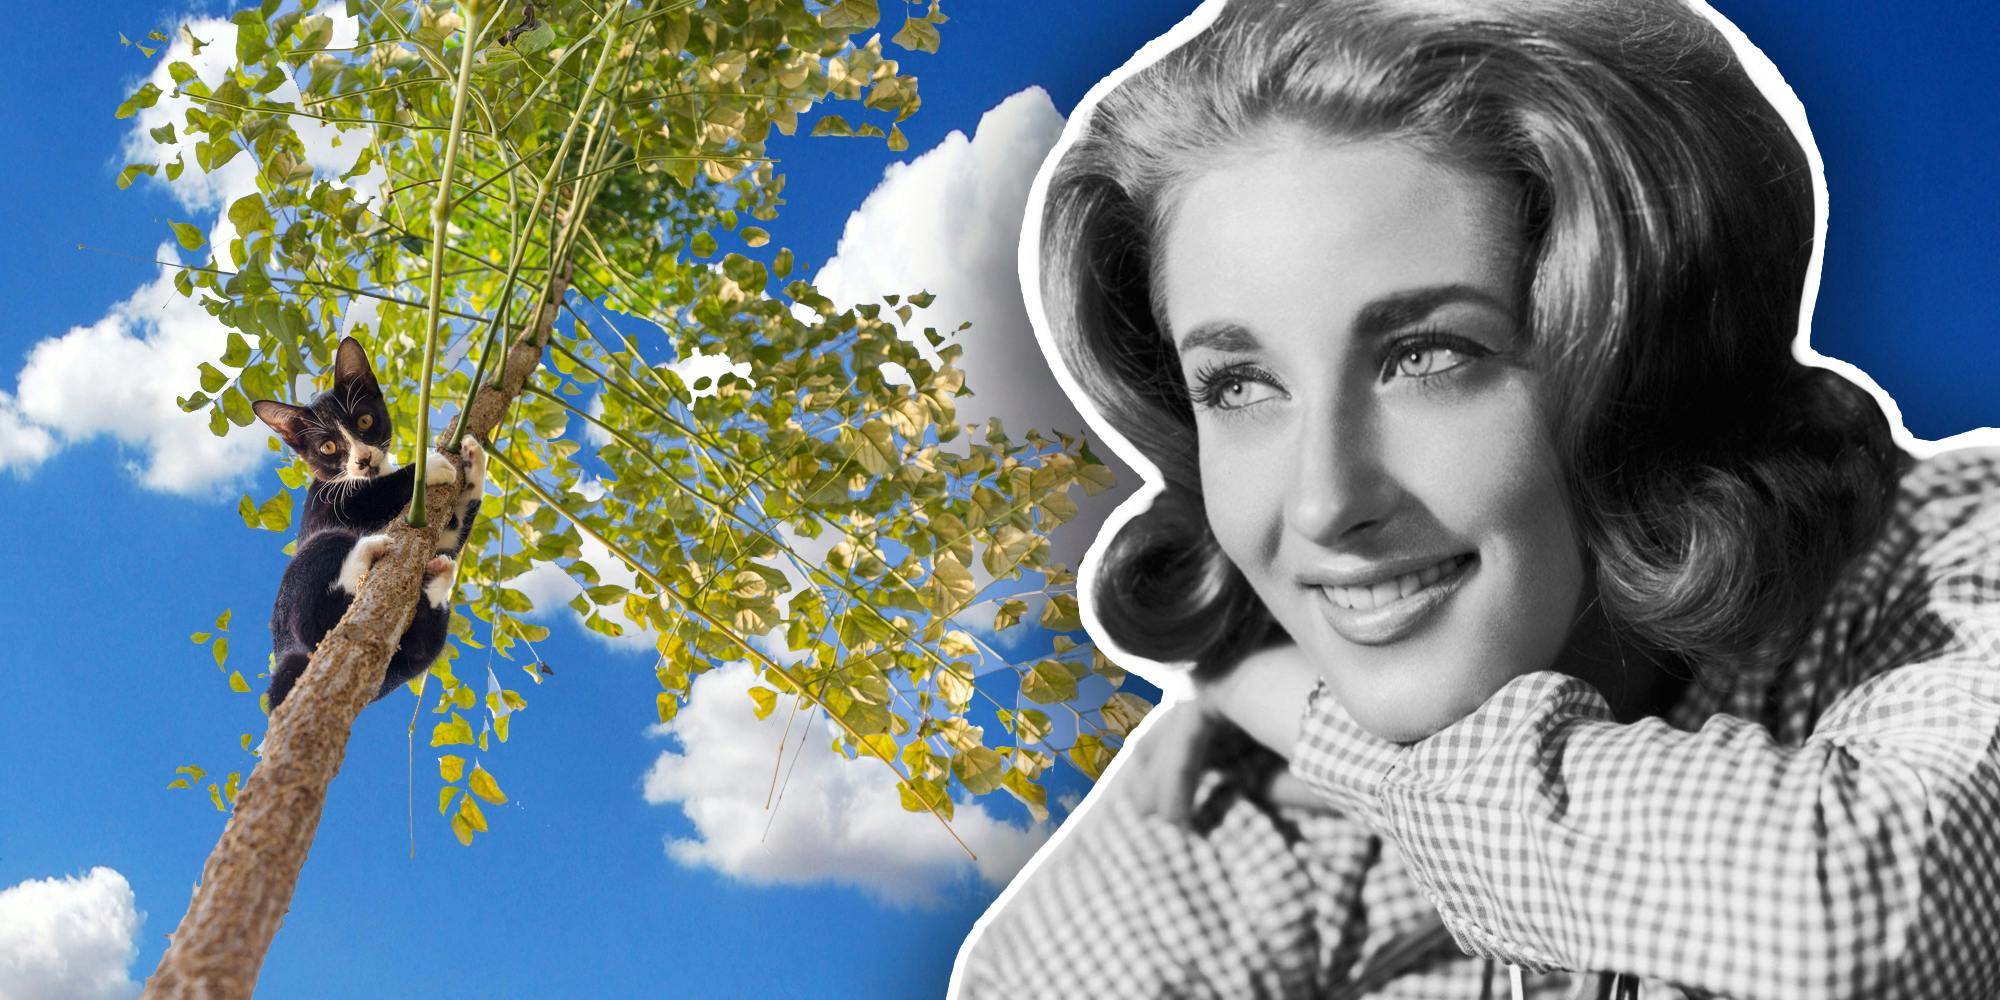 Lesley Gore with cat in a tree and clouds in the background